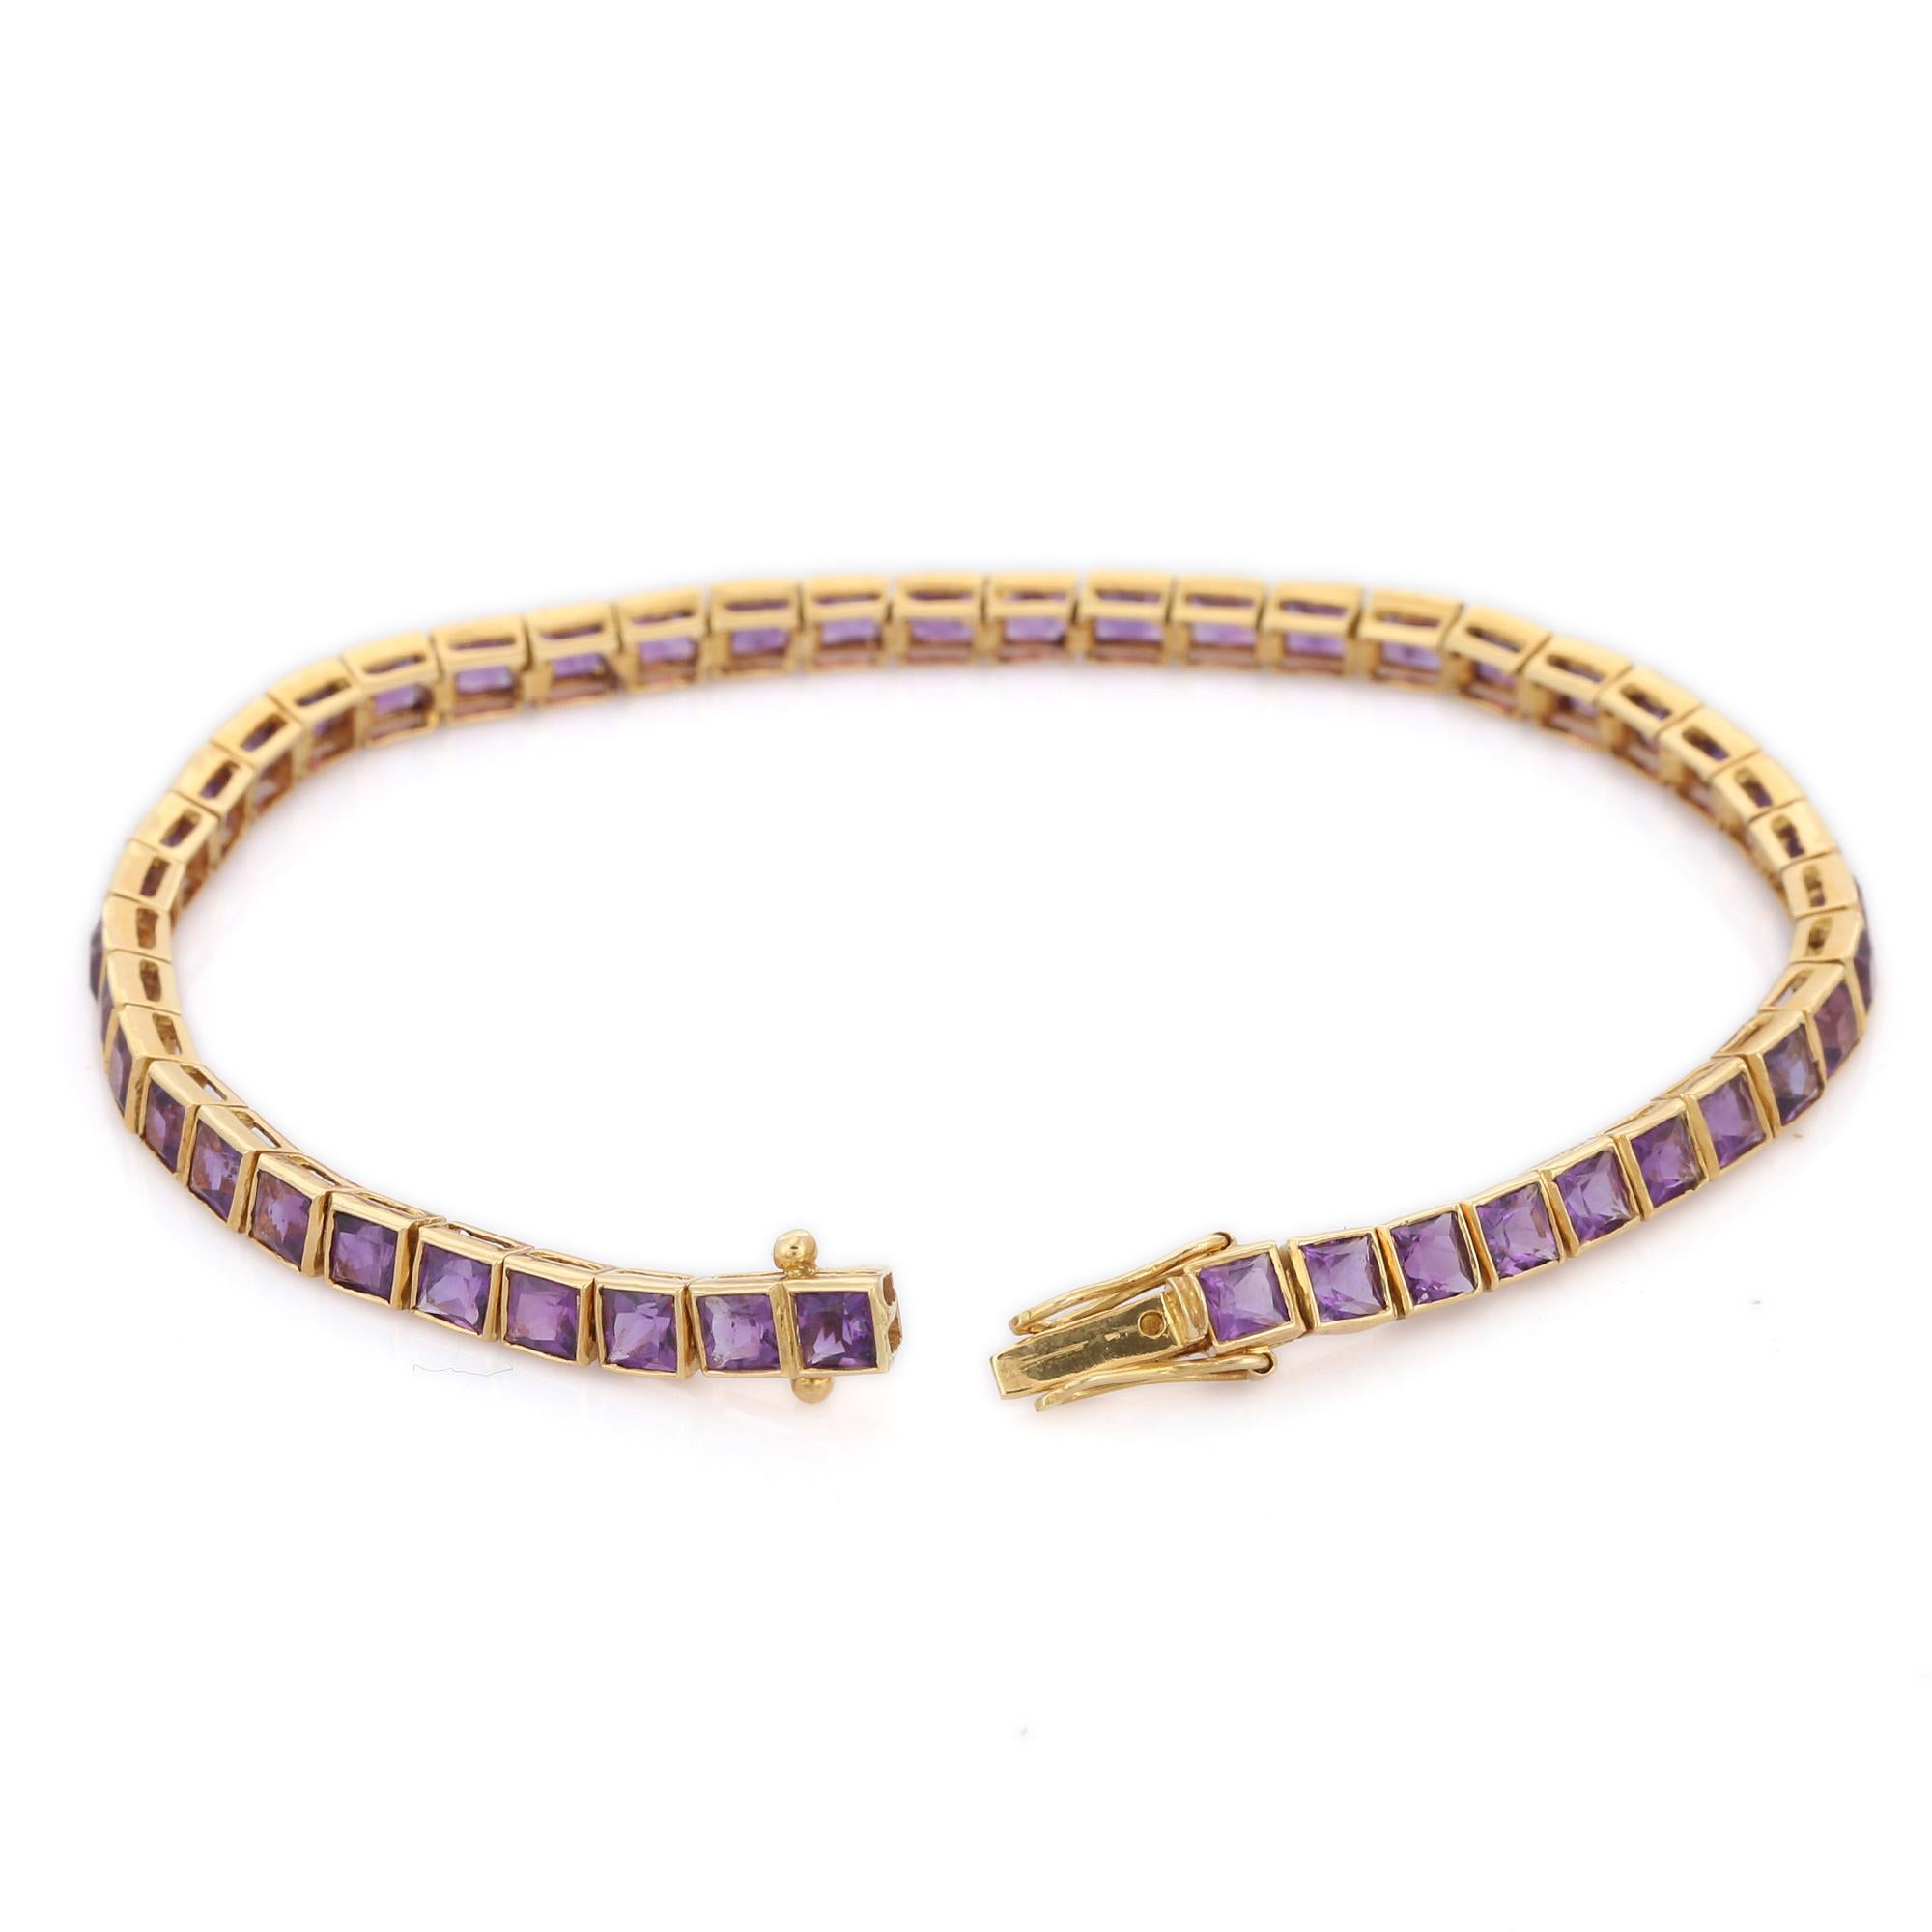 Amethyst bracelet in 18K Gold. It has a perfect square cut gemstone to make you stand out on any occasion or an event. 
A tennis bracelet is an essential piece of jewelry when it comes to your wedding day. The sleek and elegant style complements the